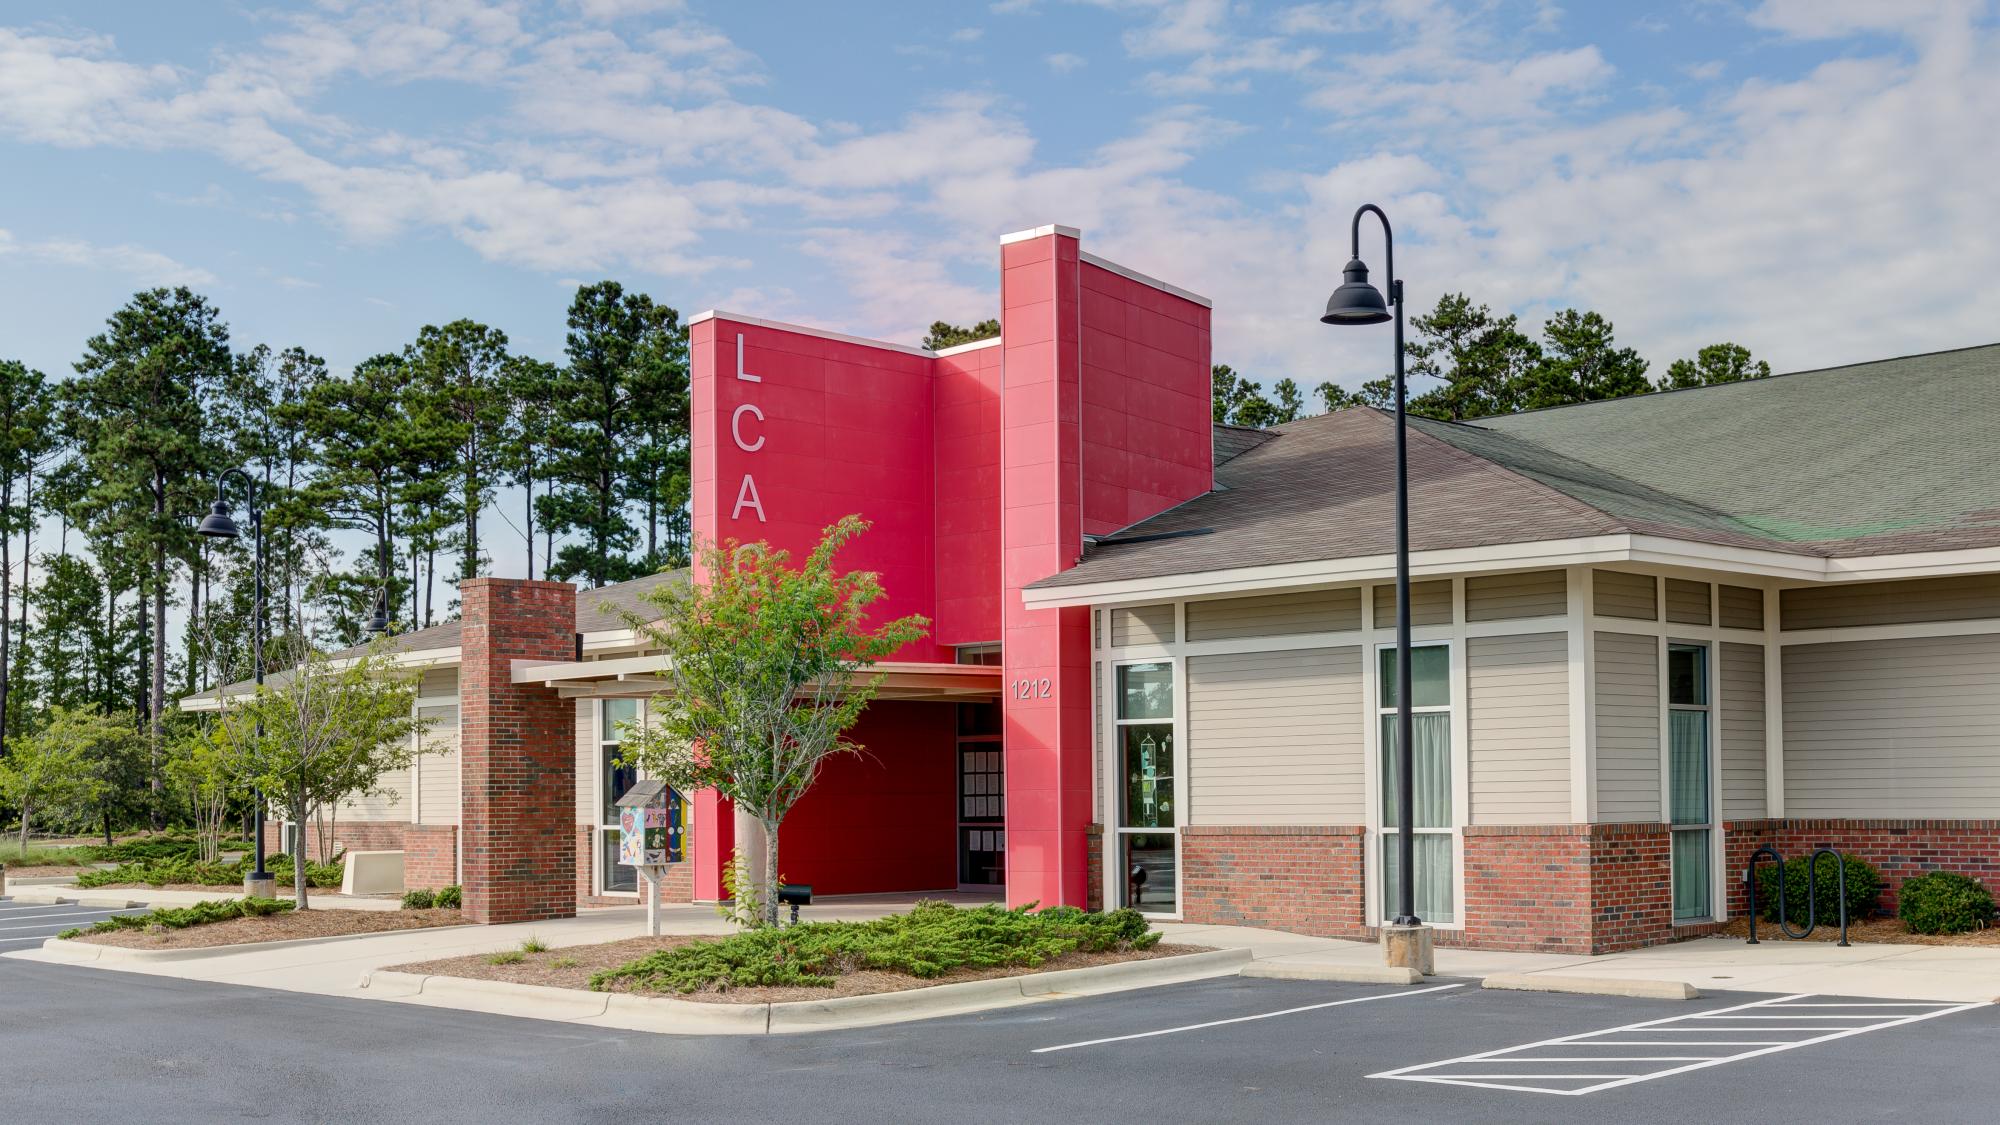 Brick building with bright red exterior in Leland, NC